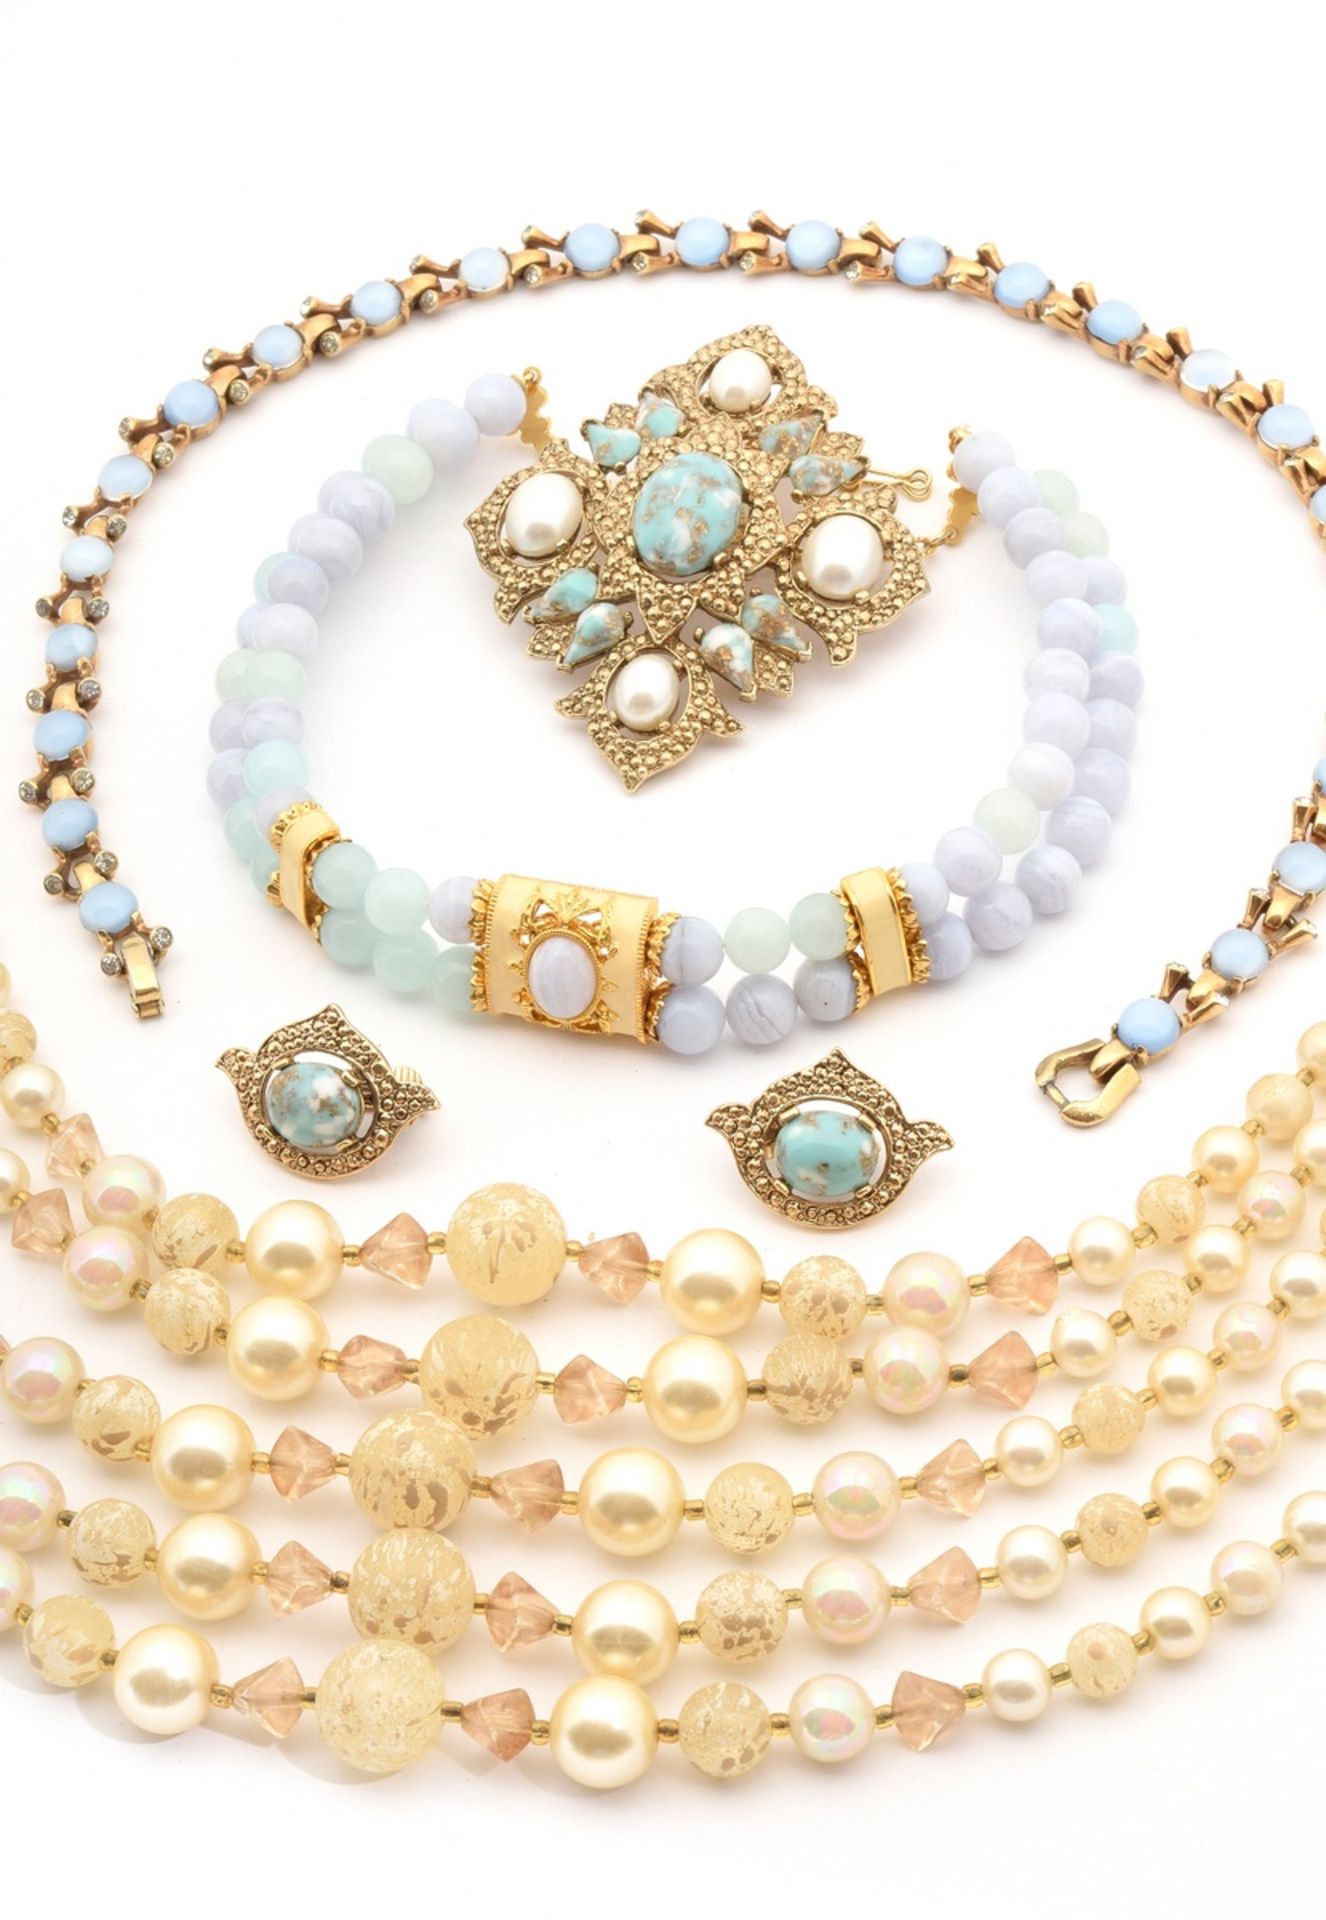 6 pieces of gold-plated light blue/beige fashion/costume jewellery made of glass and artificial pea